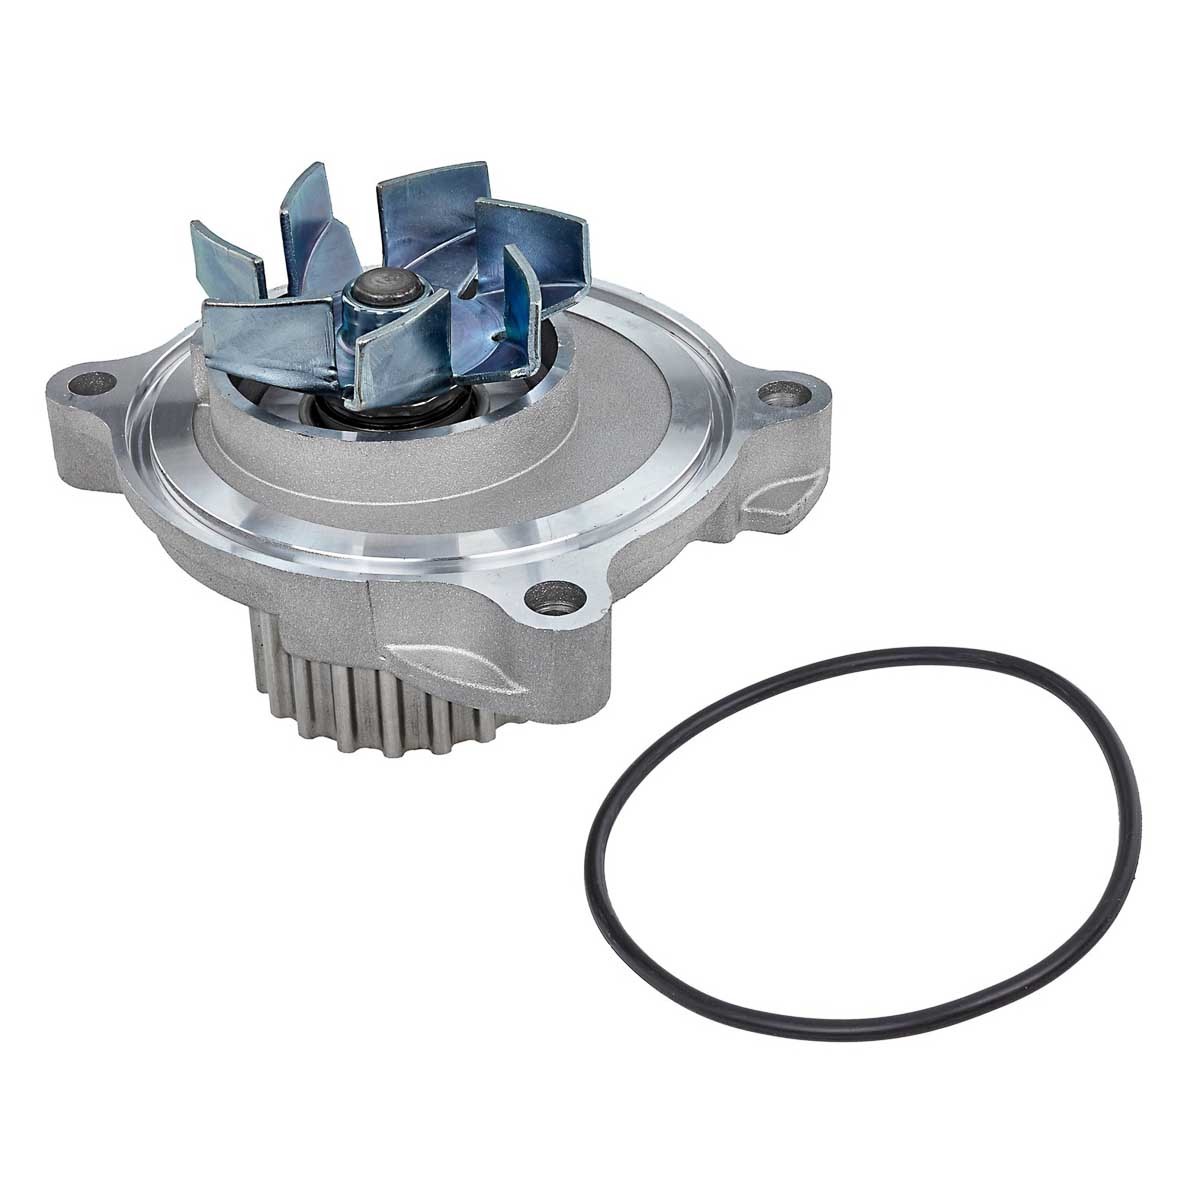 MEYLE 113 012 0042/HD Water pump Number of Teeth: 20, with seal, Metal, Quality, for timing belt drive